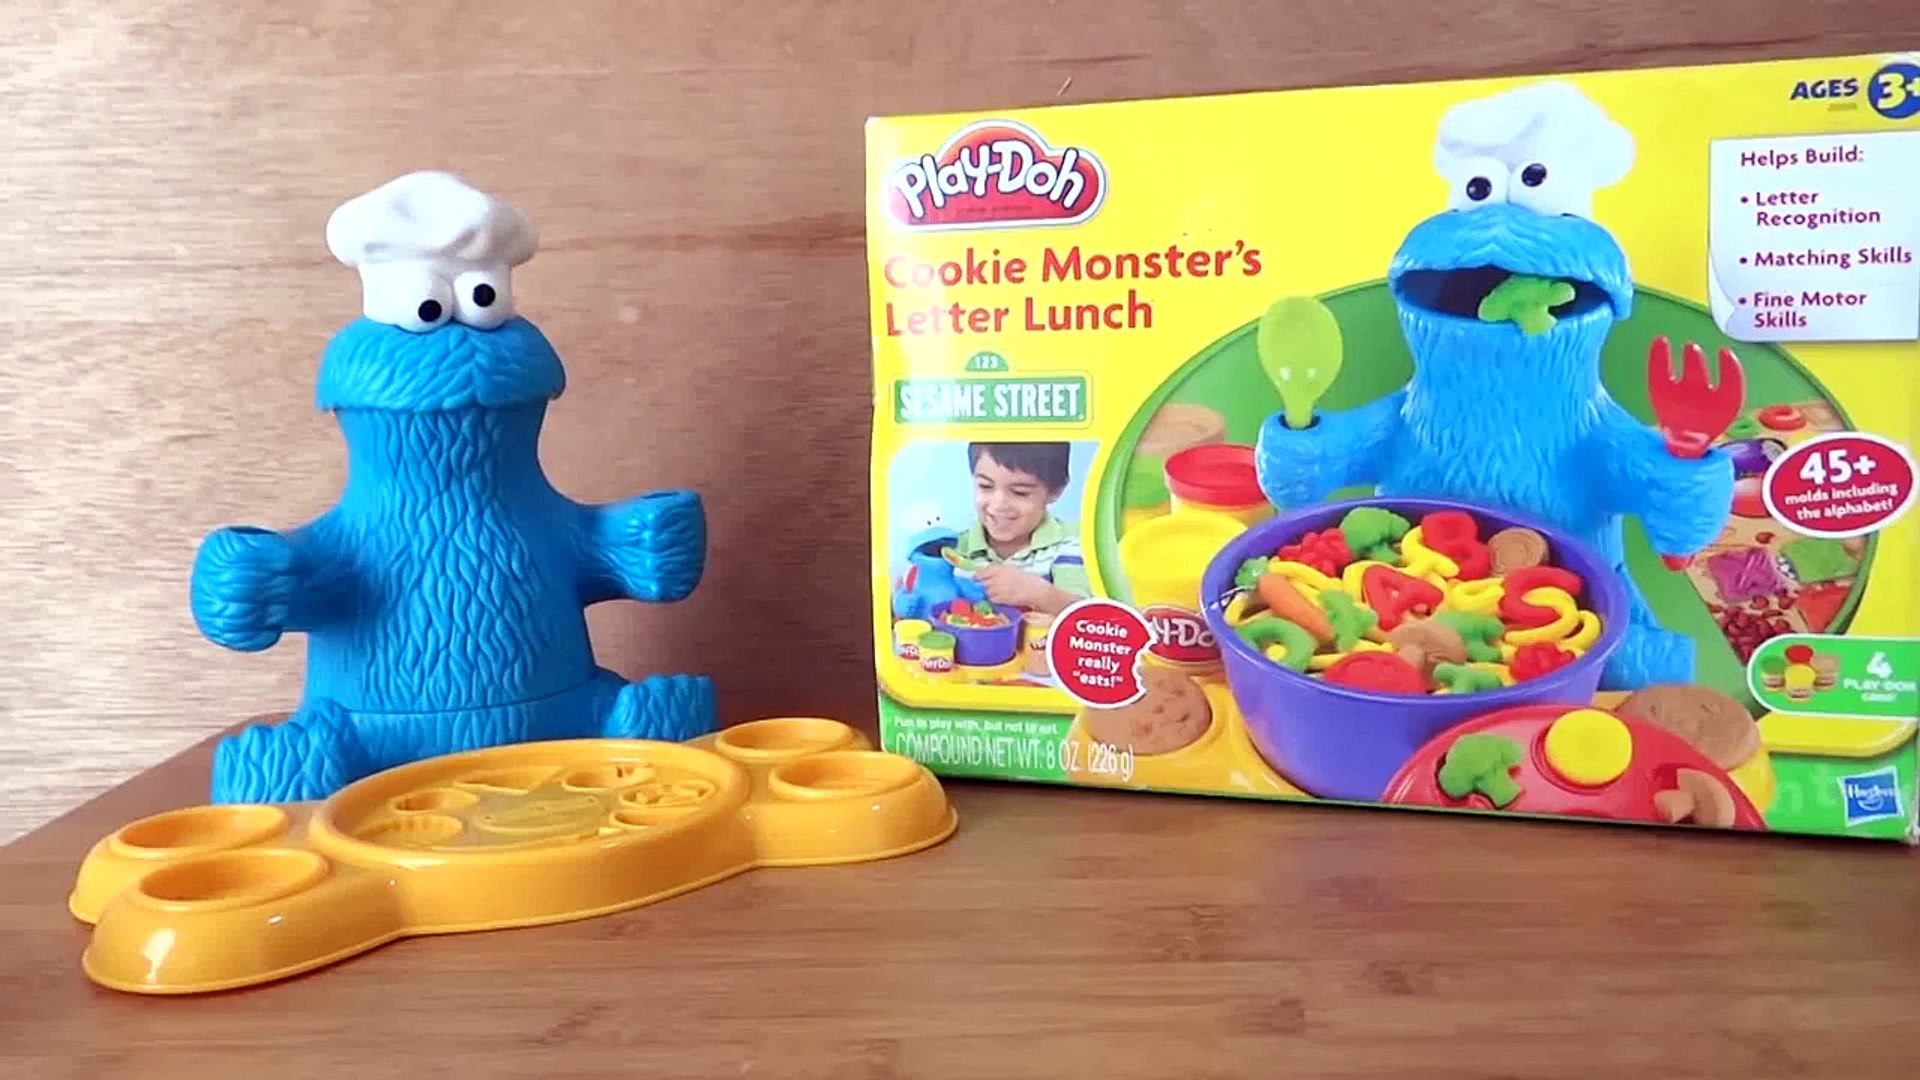 Play Doh Kids Toys Cookie Monster Letter Lunch クッキーモンスター 粘土 Dailymotion Video